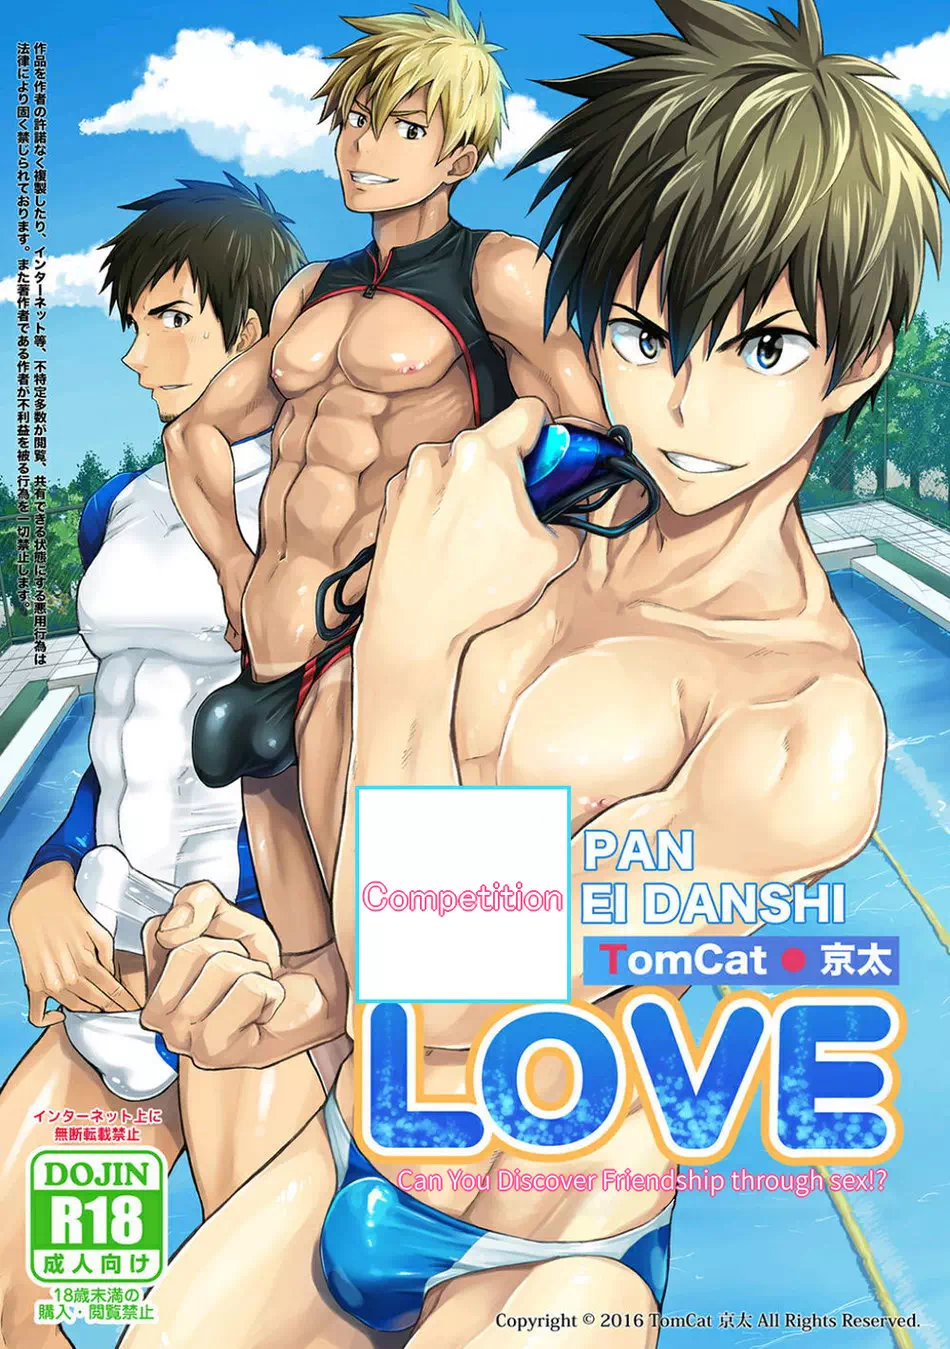 Explore the Best Collection of Yaoi Hentai Manga Today